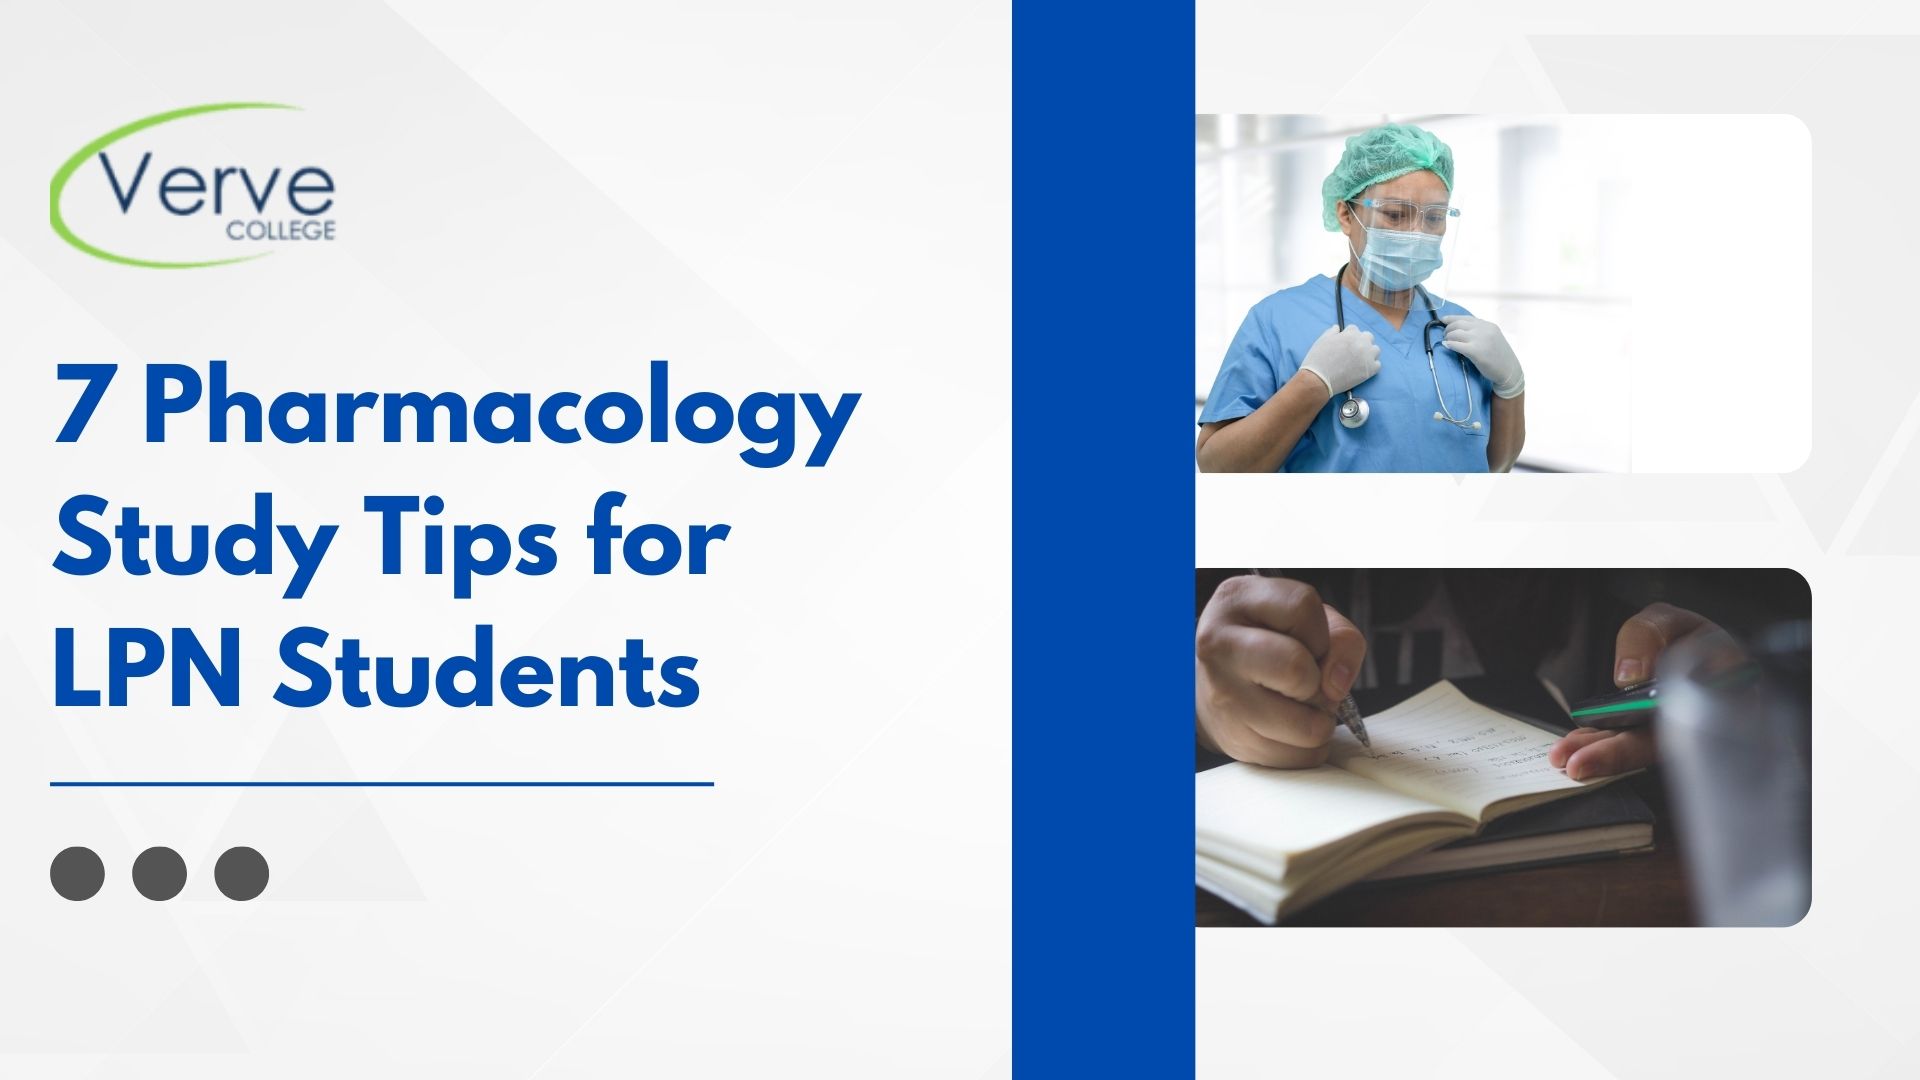 7 Essential Pharmacology Study Tips for LPN Students